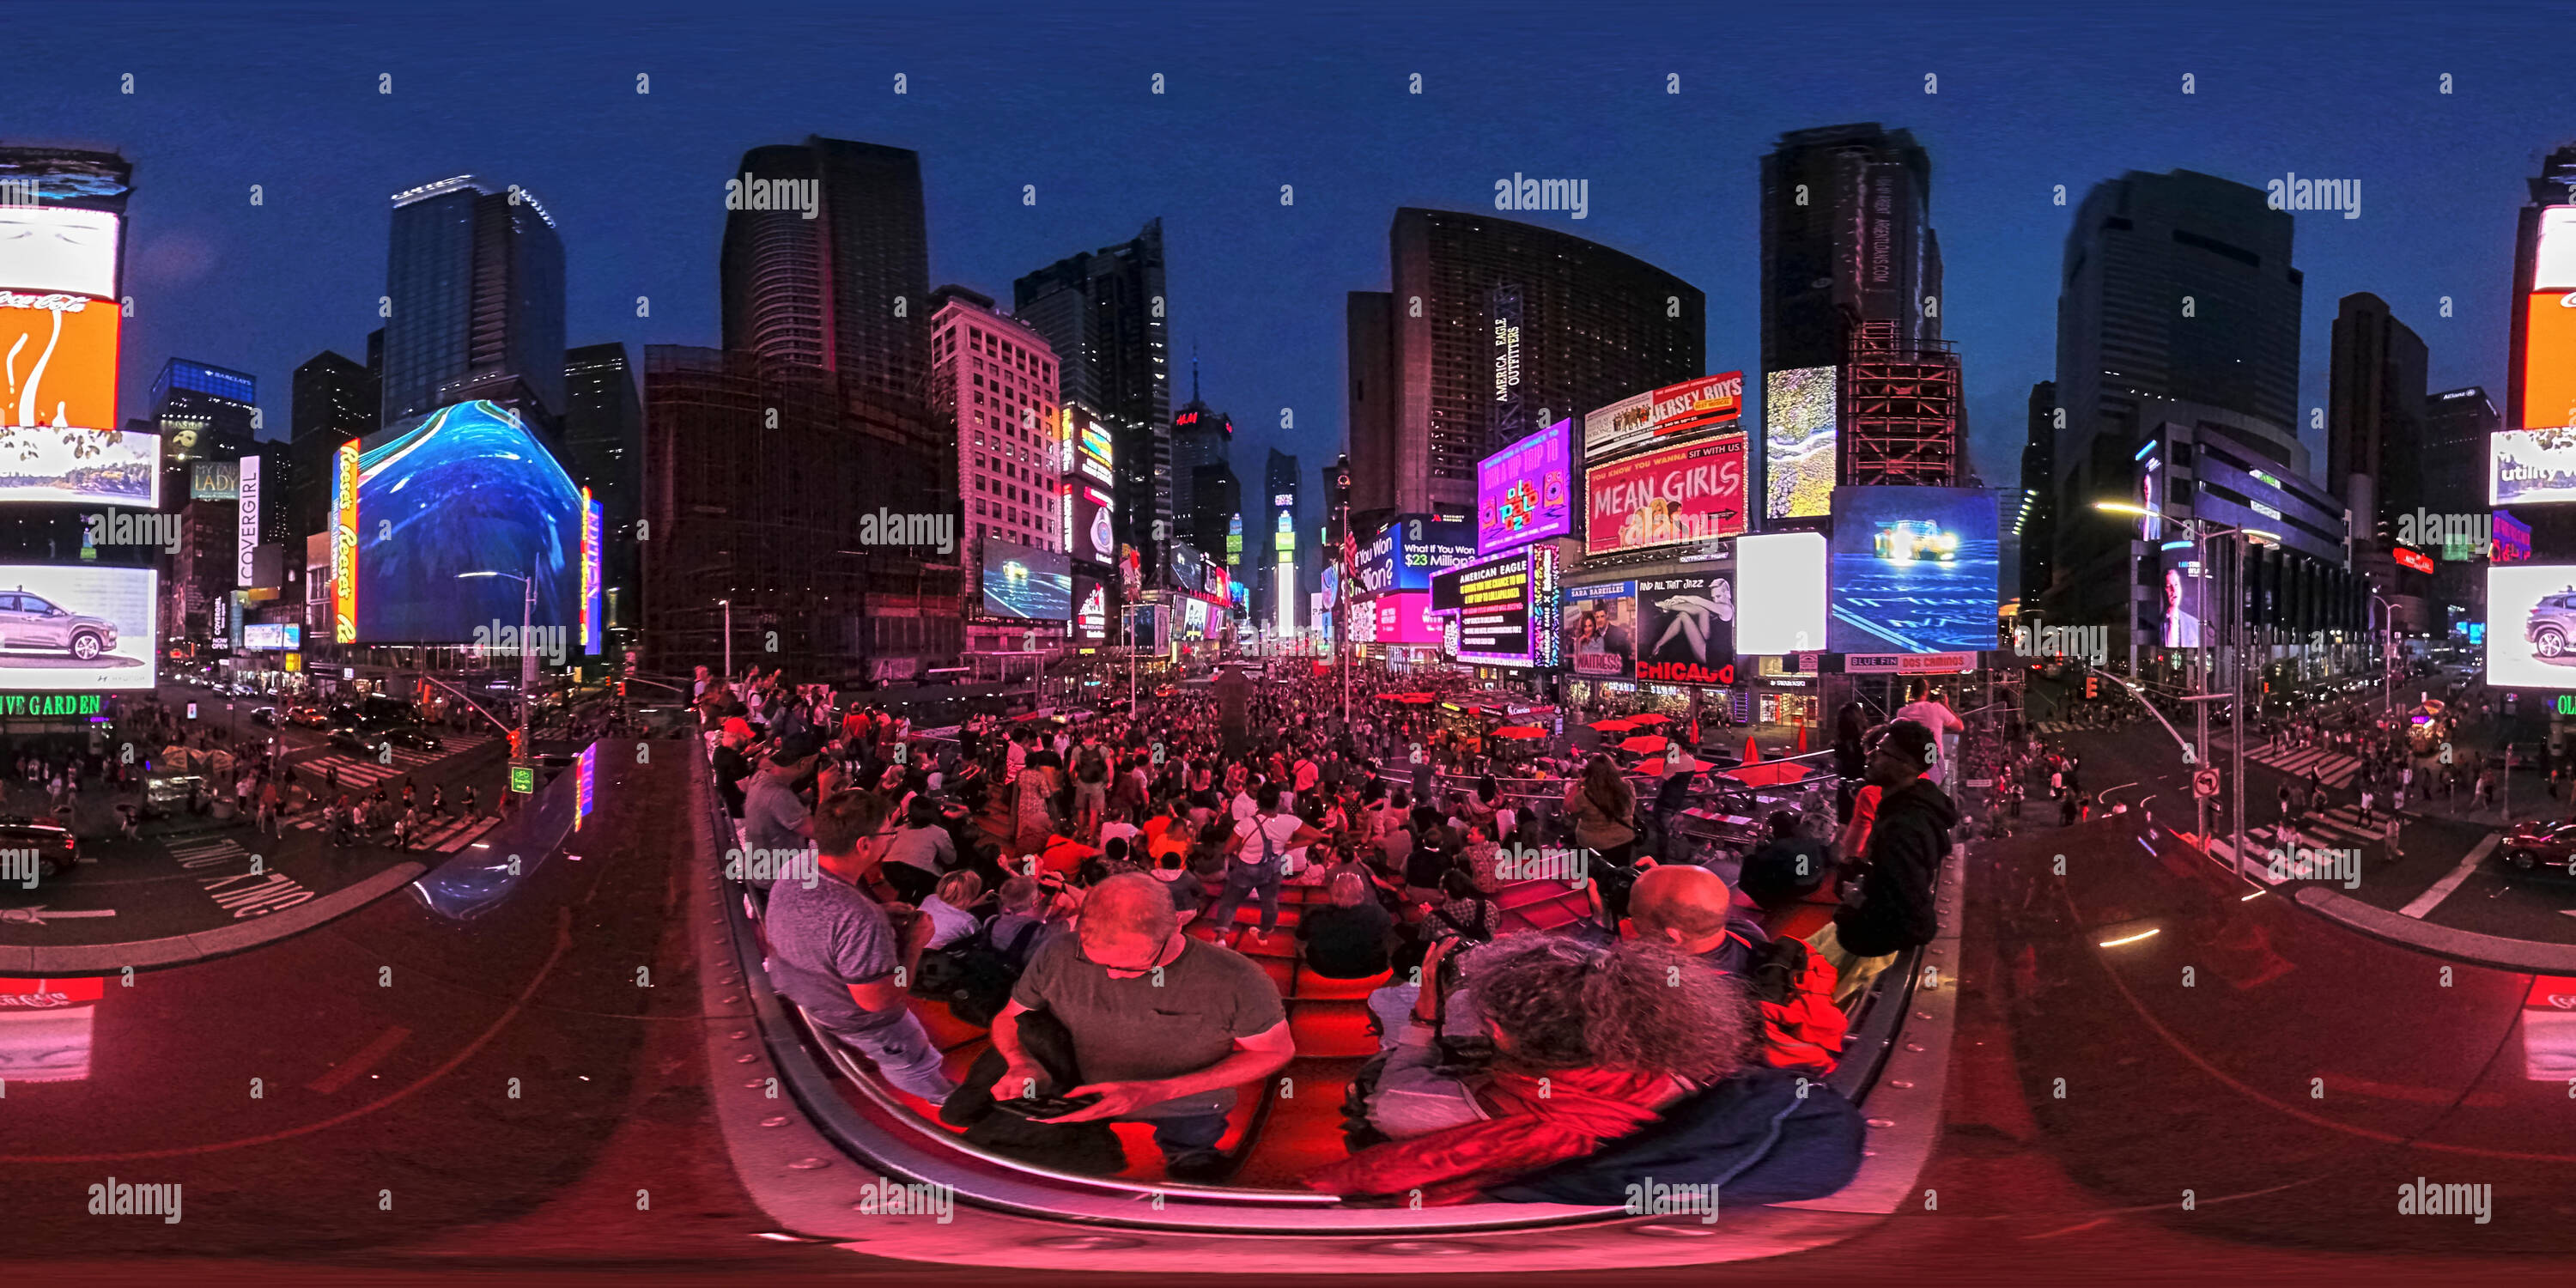 360 degree panoramic view of 360 degrees panorama of Times Square New York at dusk with illuminated advertising boards and tourists taking photos.